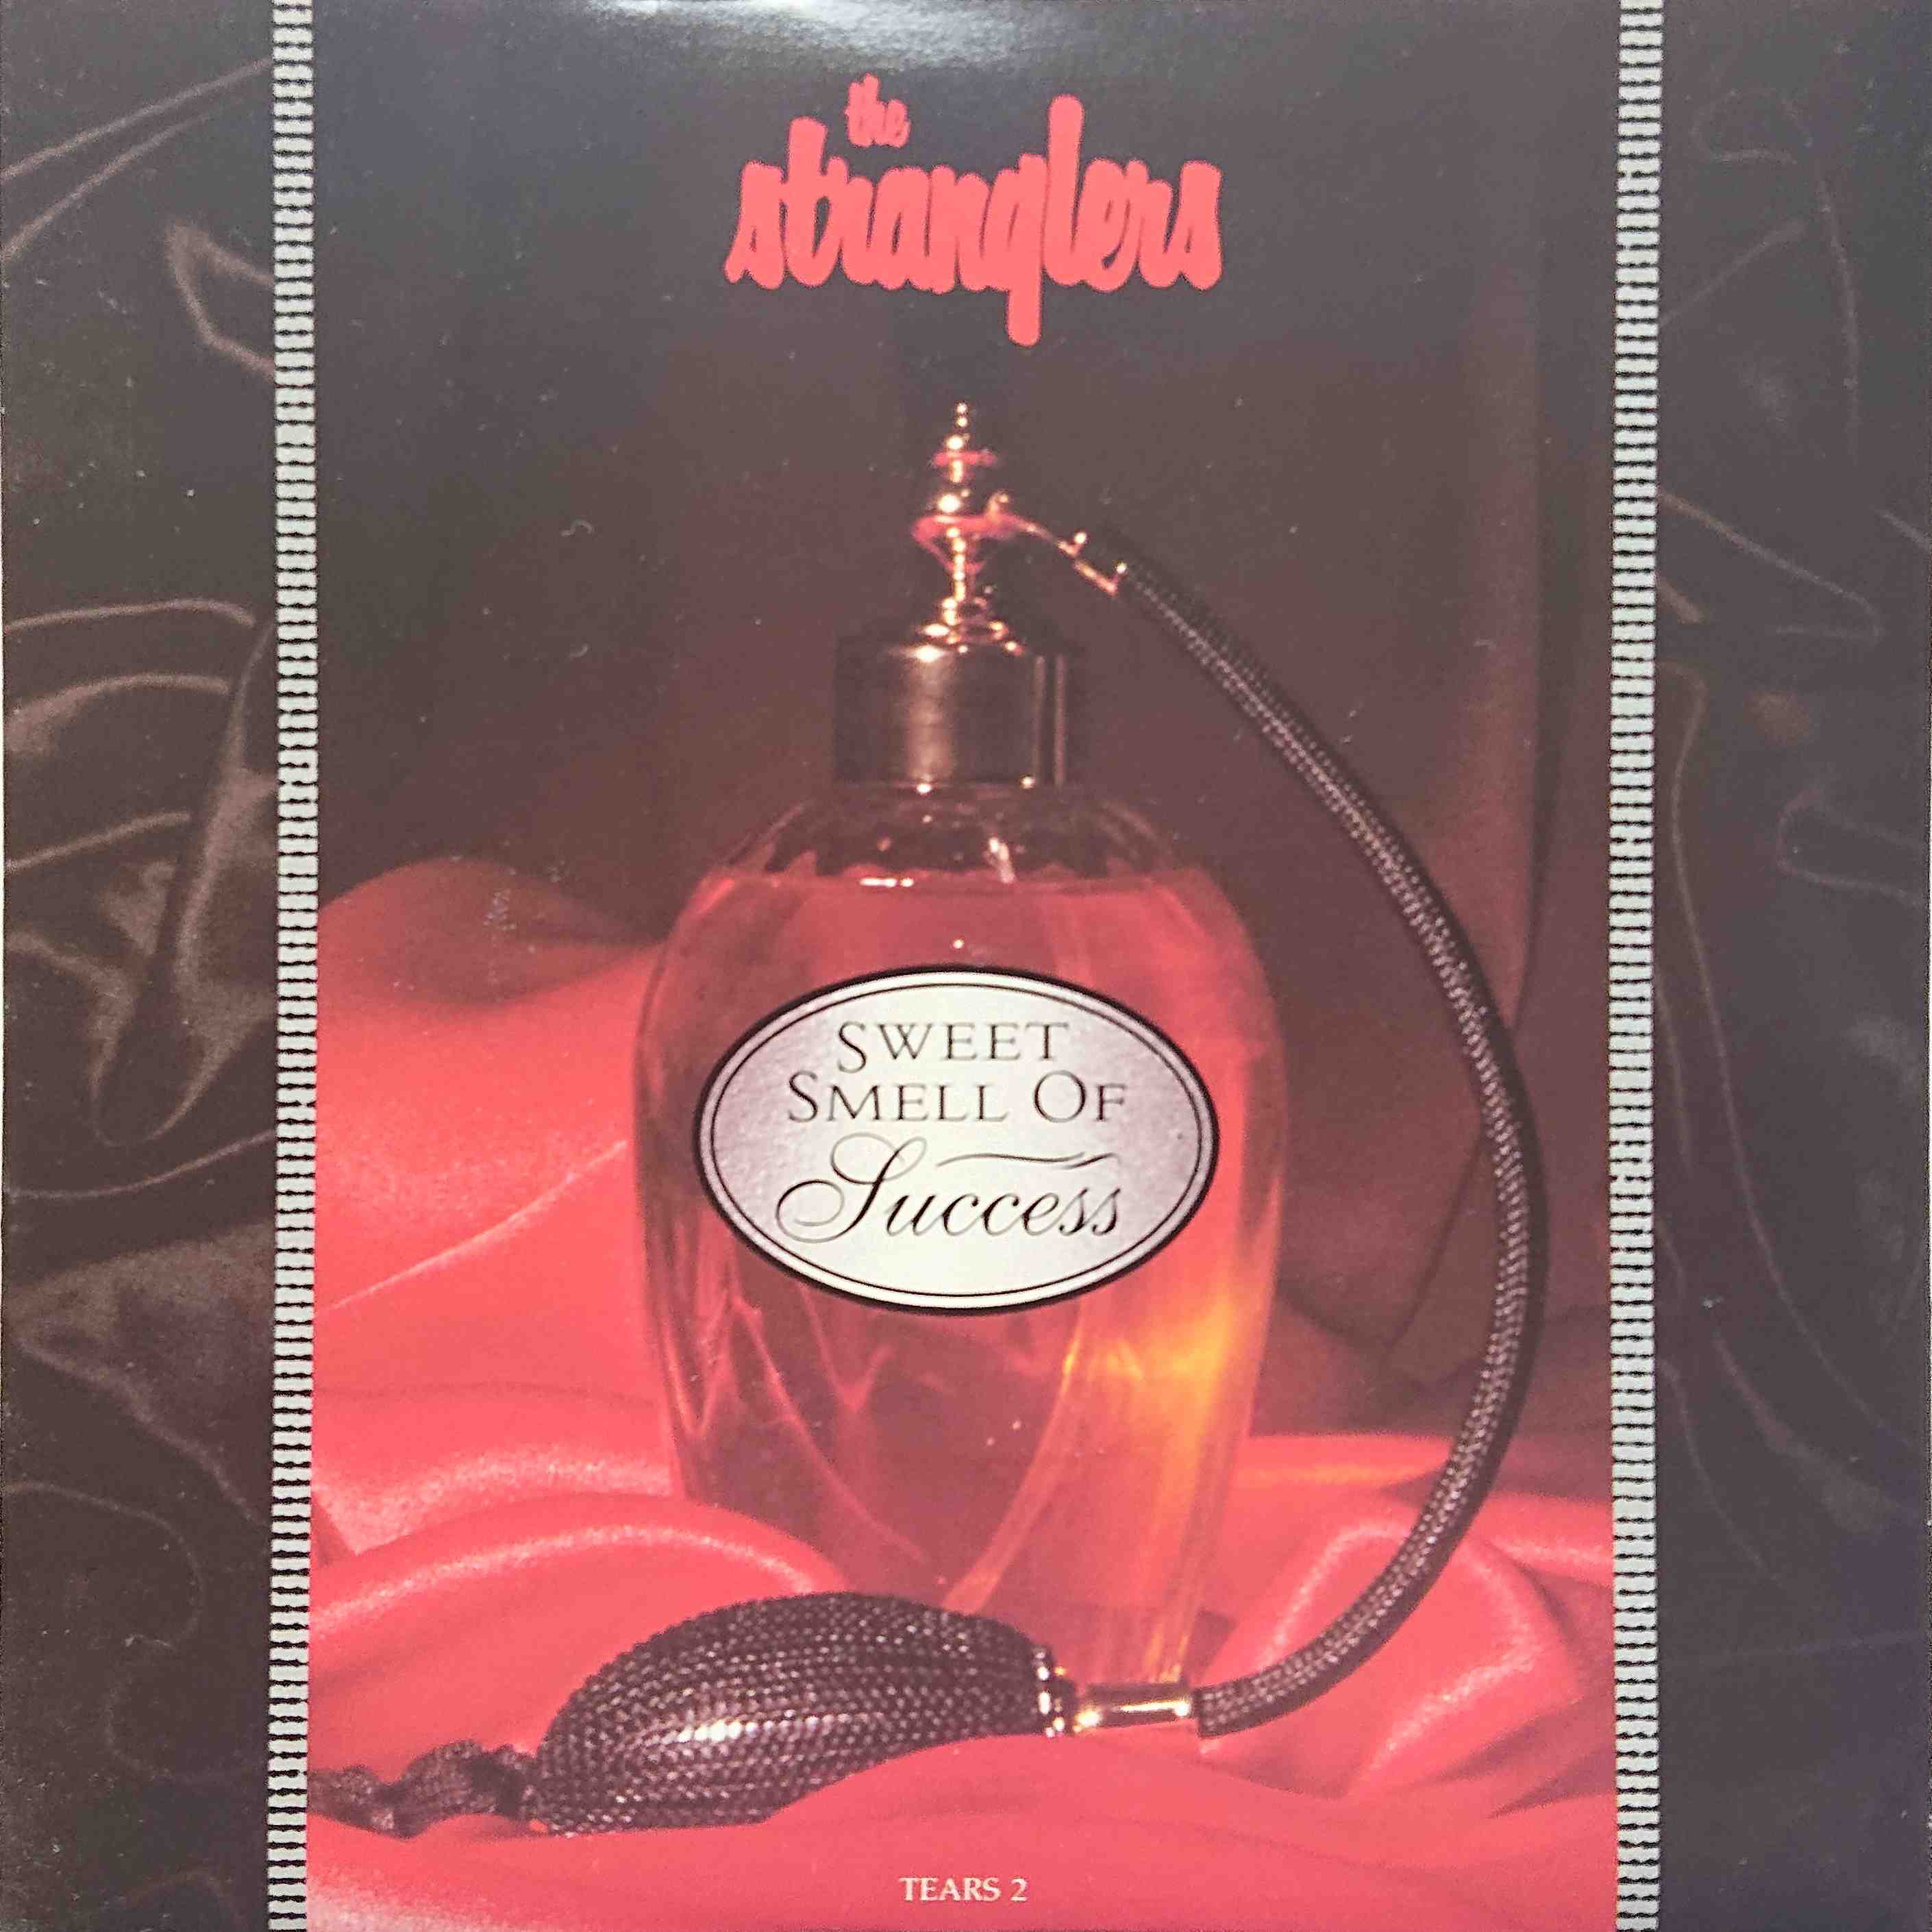 Picture of Sweet smell of success by artist The Stranglers  from The Stranglers singles